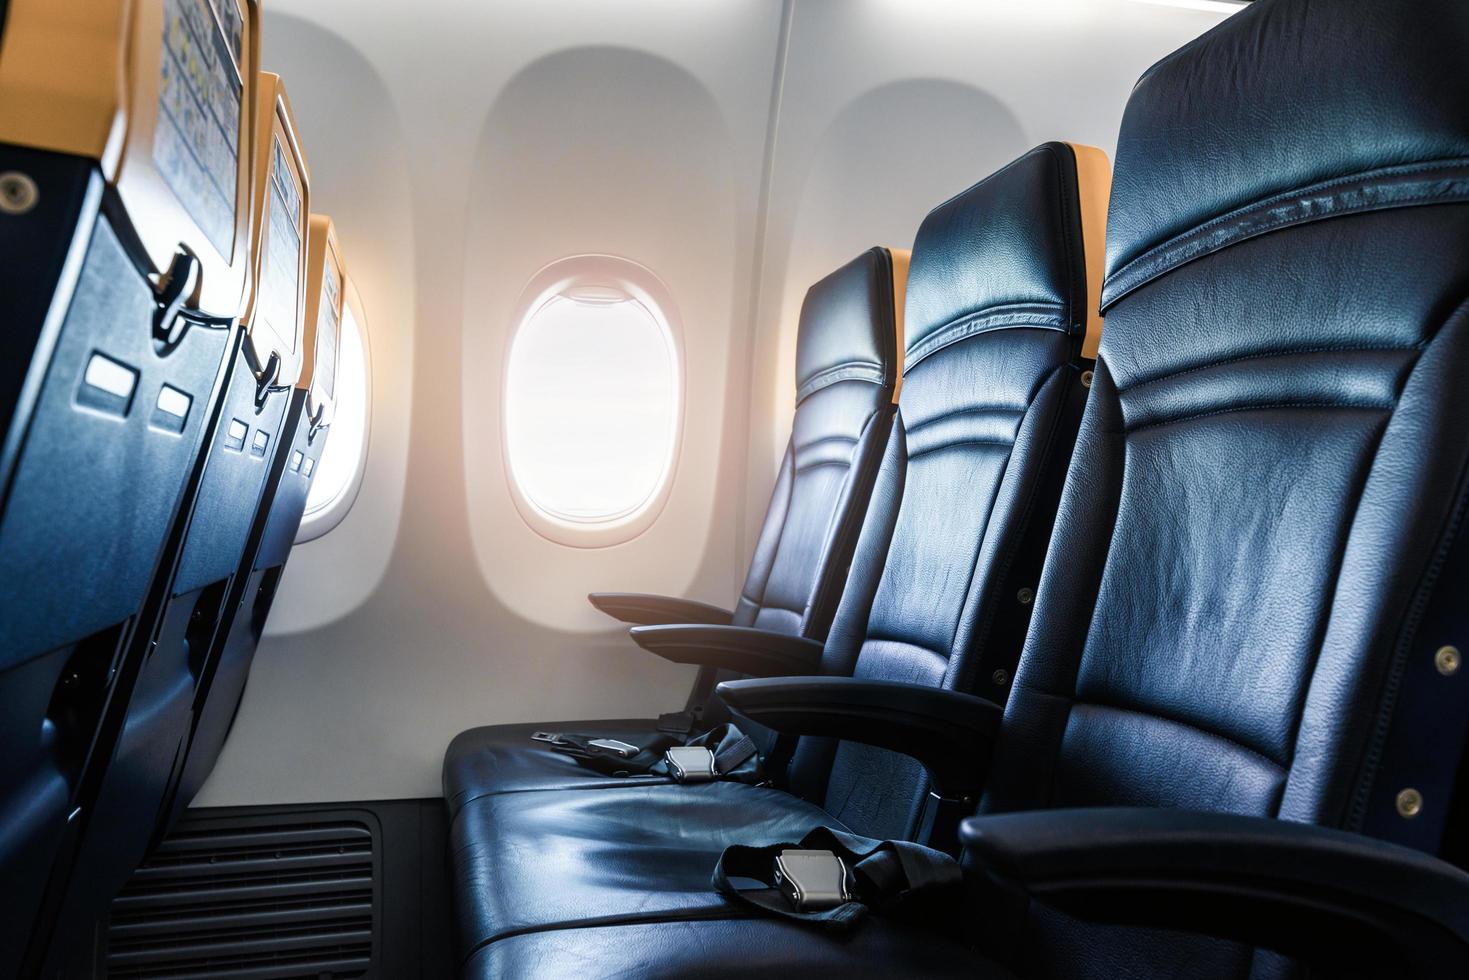 Plane interior - cabin with modern leather chair for passenger of airplane. Aircraft seats and window. - Horizontal image photo